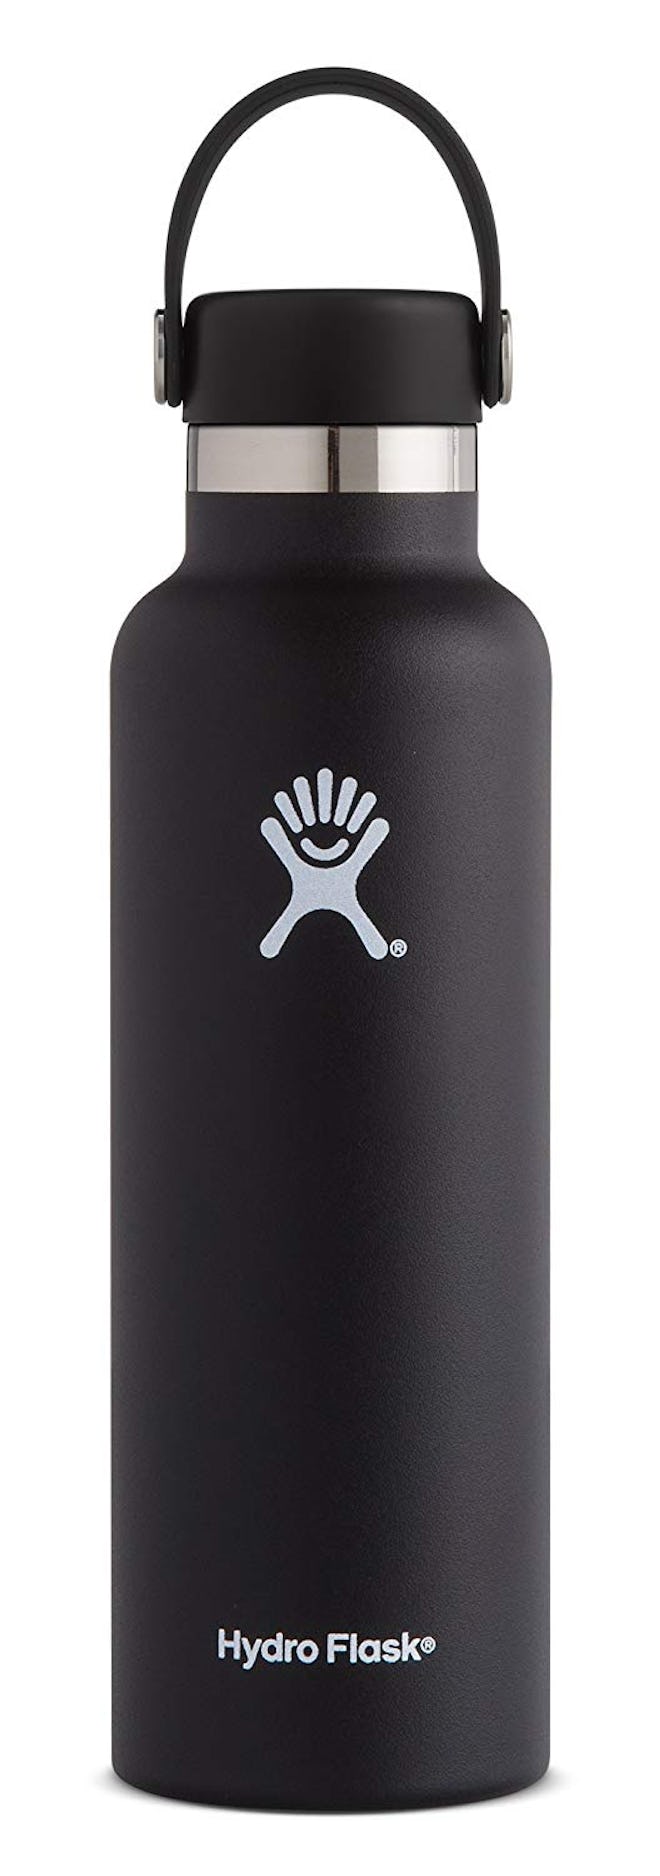 Hydro Flask Insulated Water Bottle 